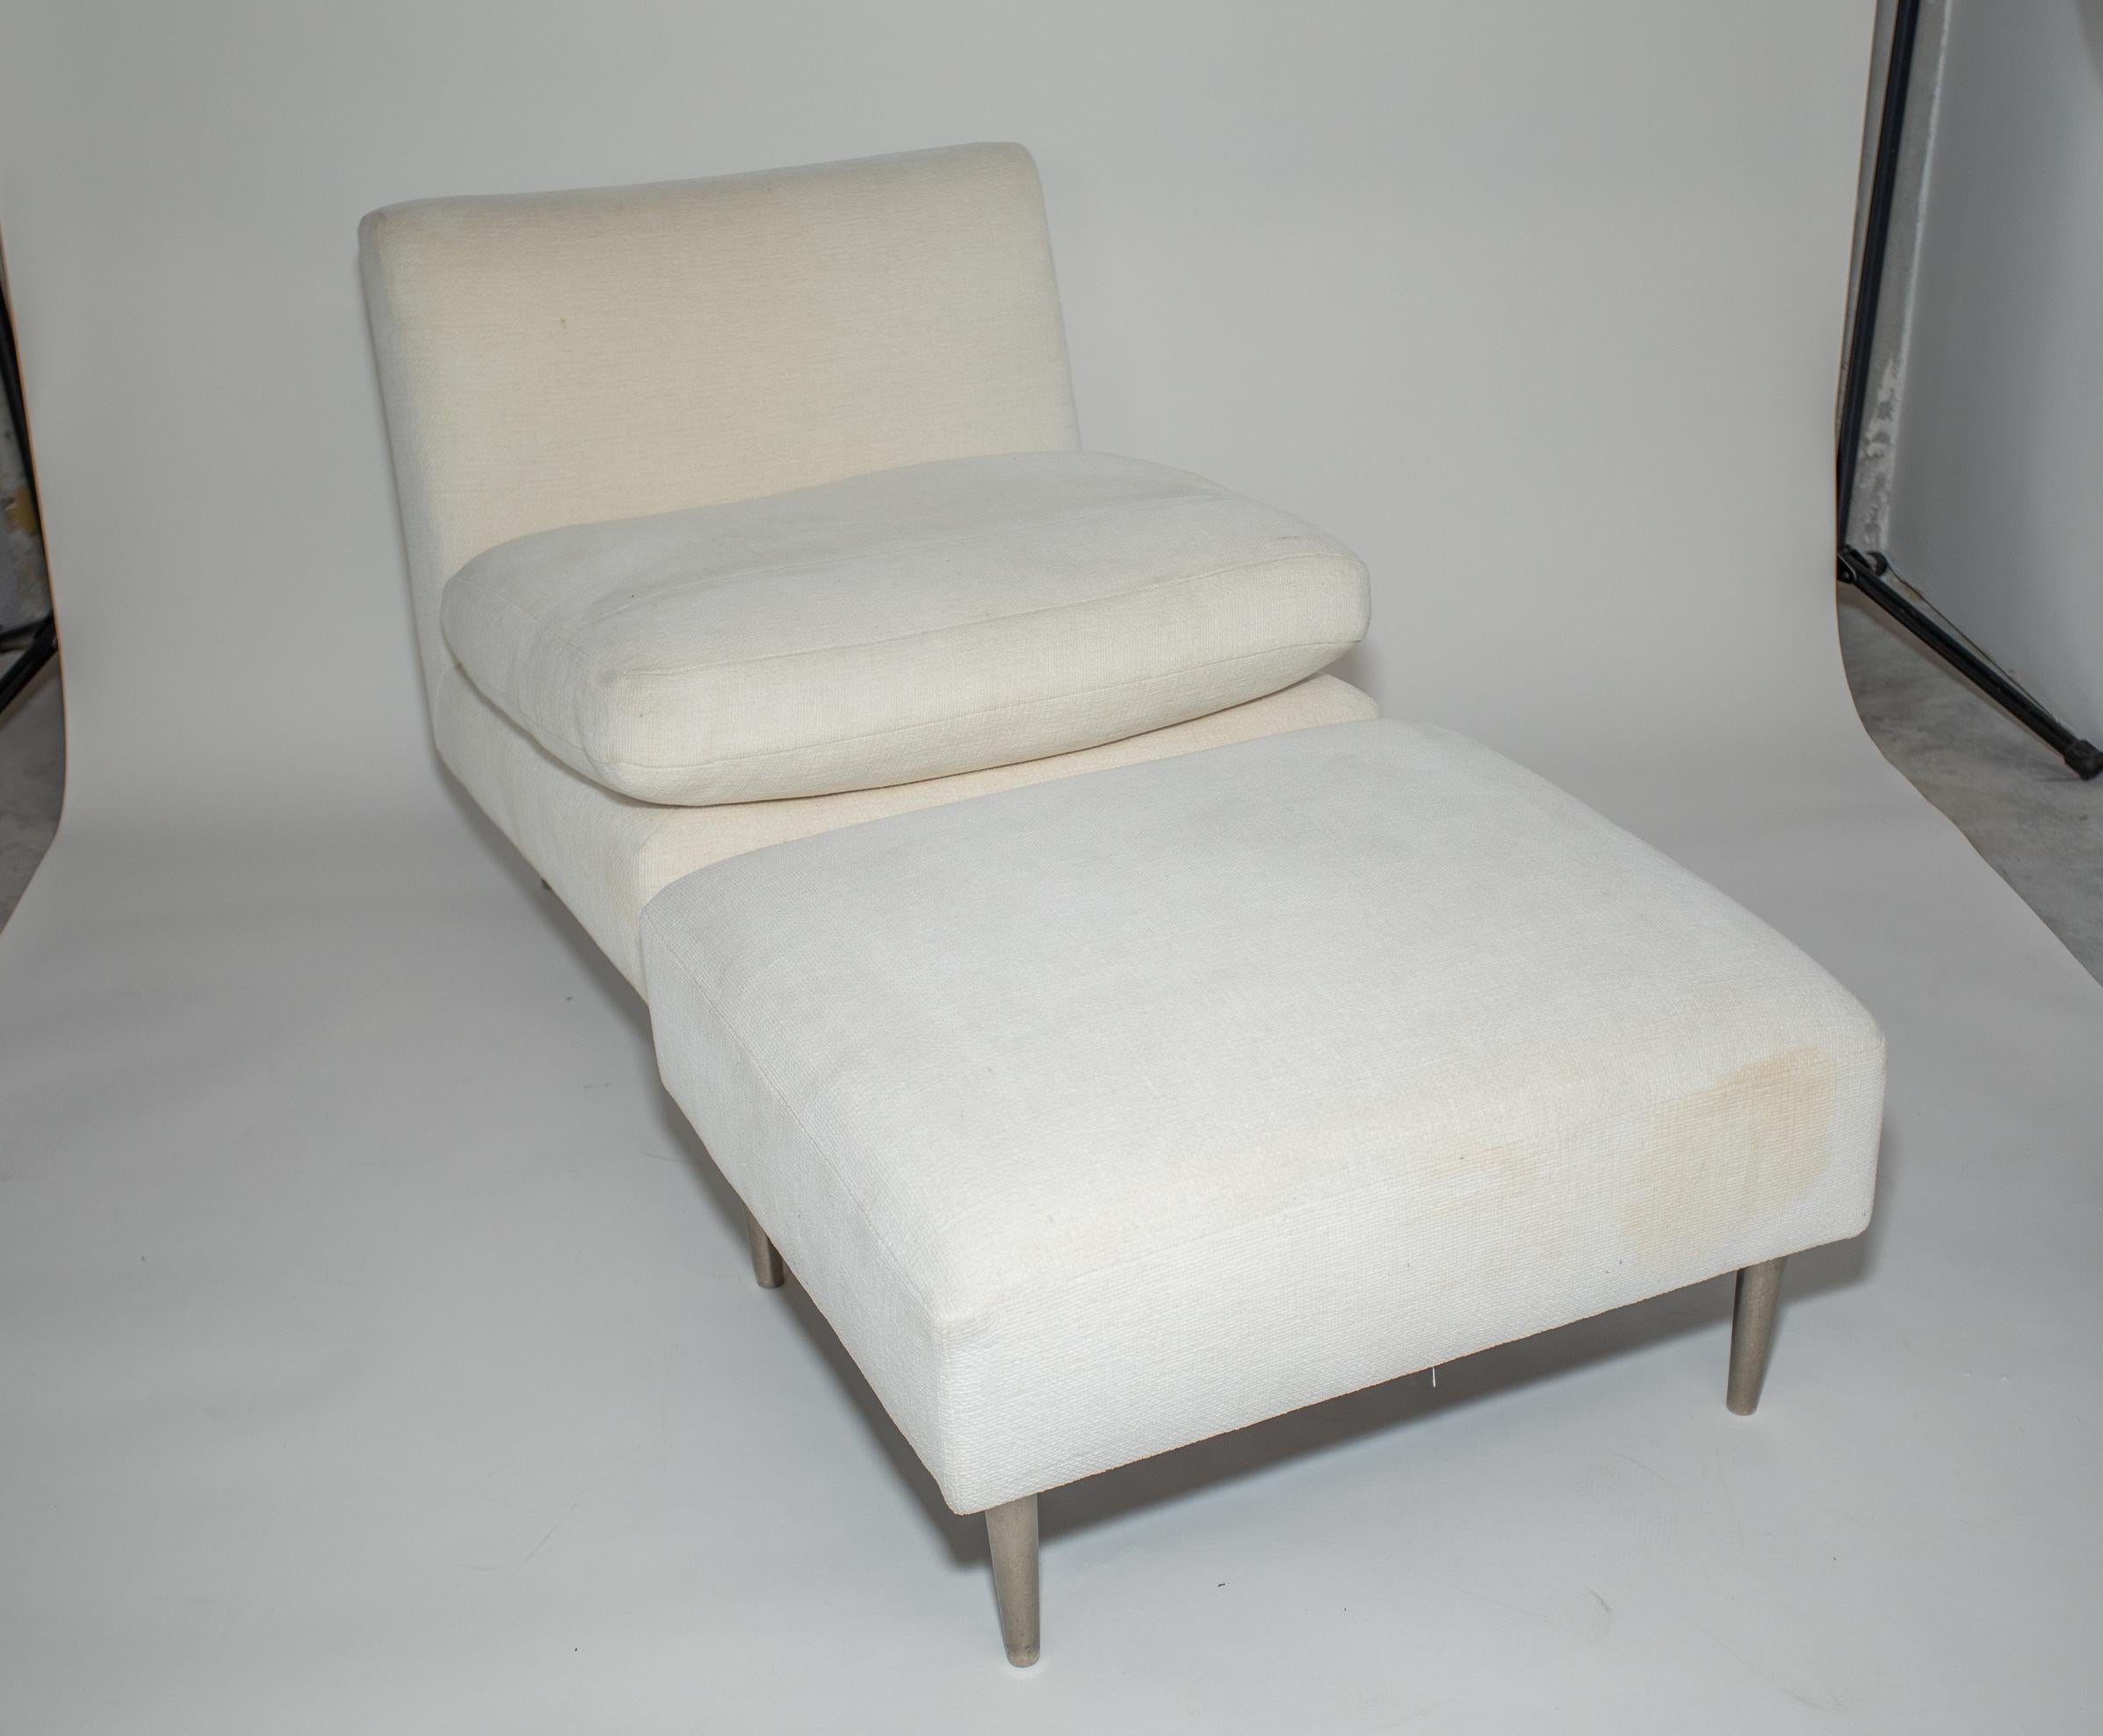 Edward Wormley for Dunbar Lounge Chair and Ottoman
Tapering Steel Legs
